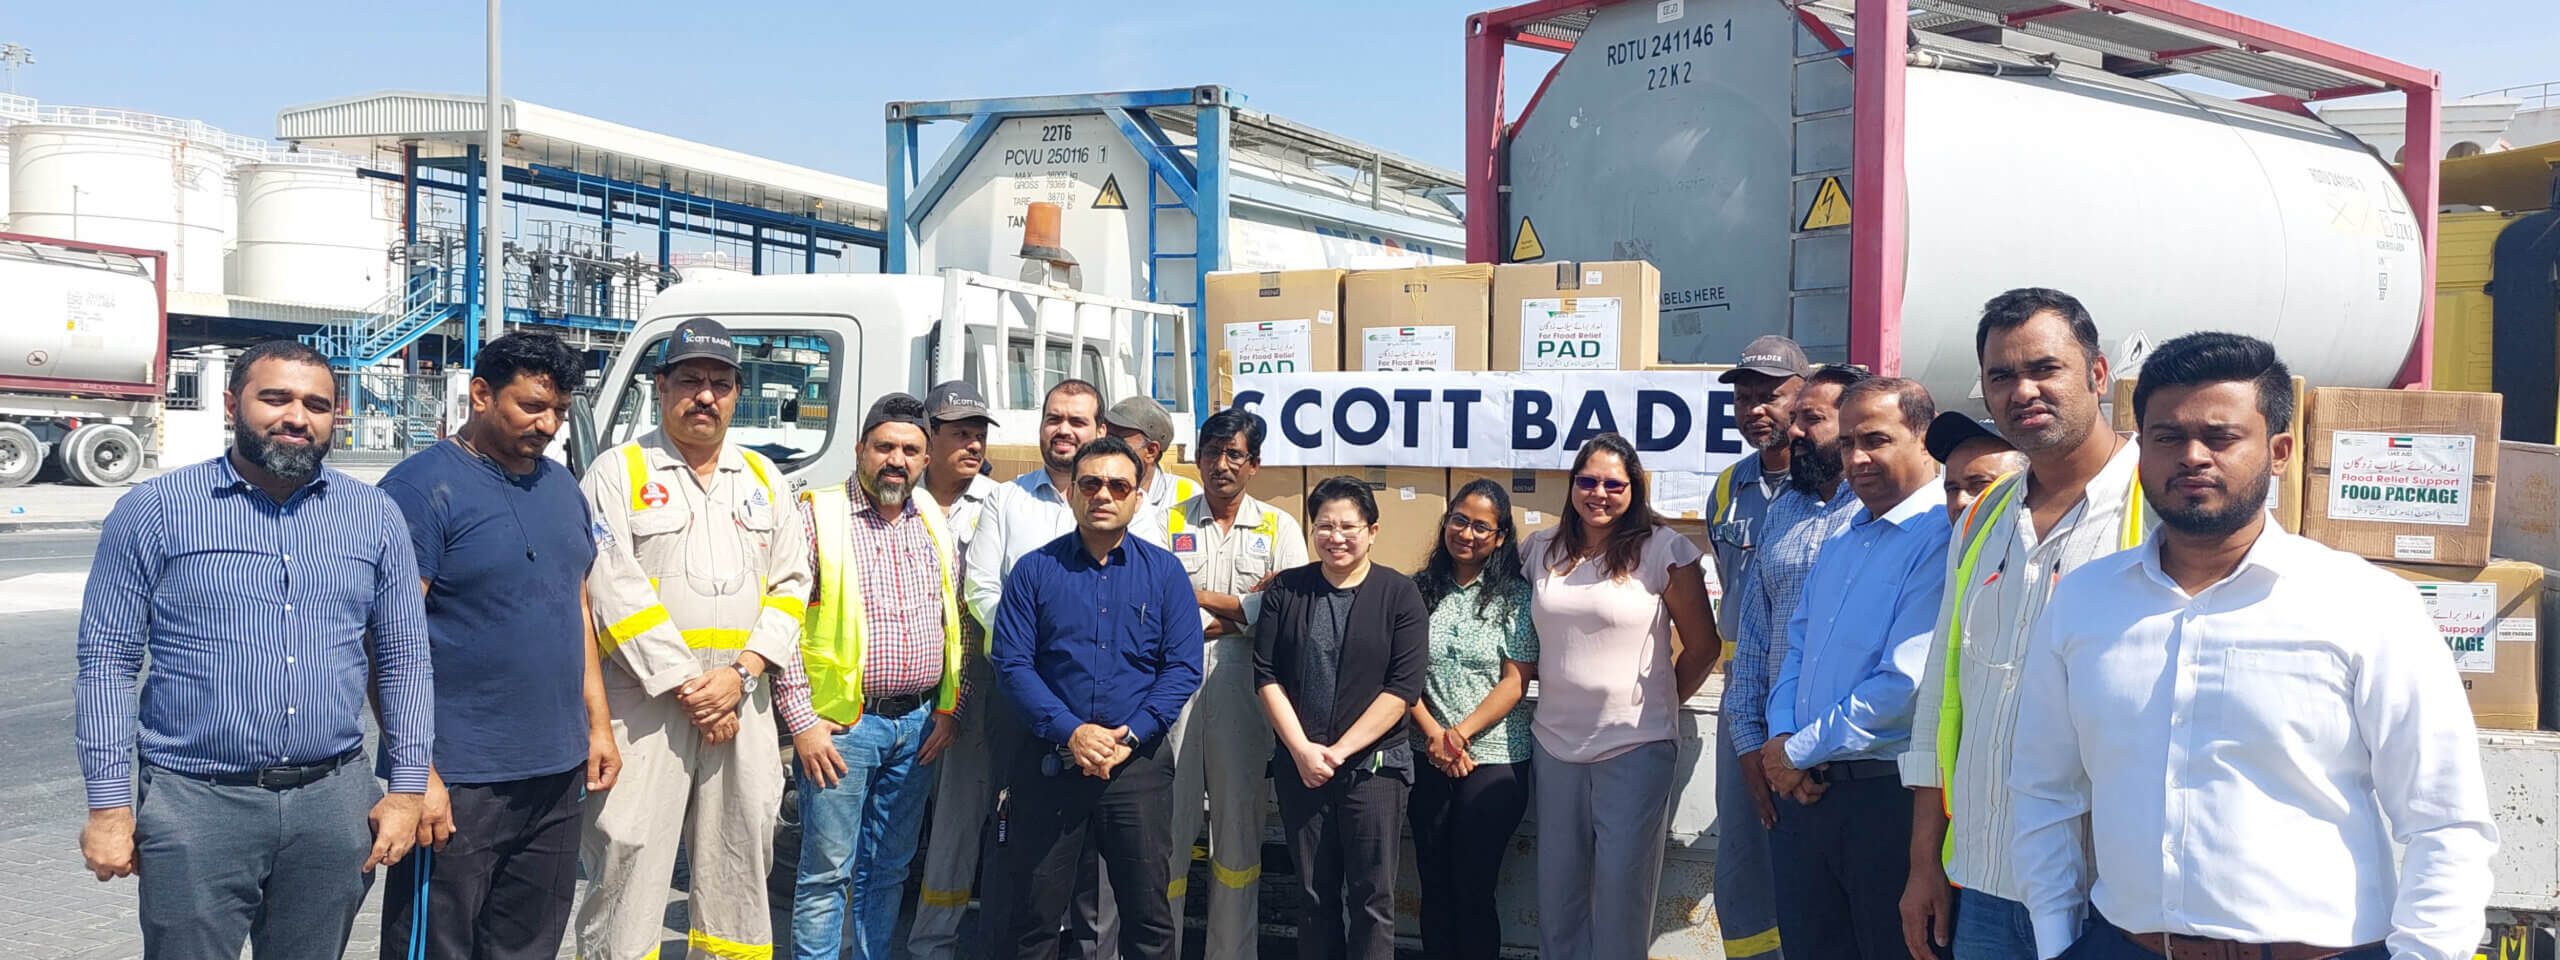 Scott Bader Middle East colleagues rally to provide Pakistan with relief support